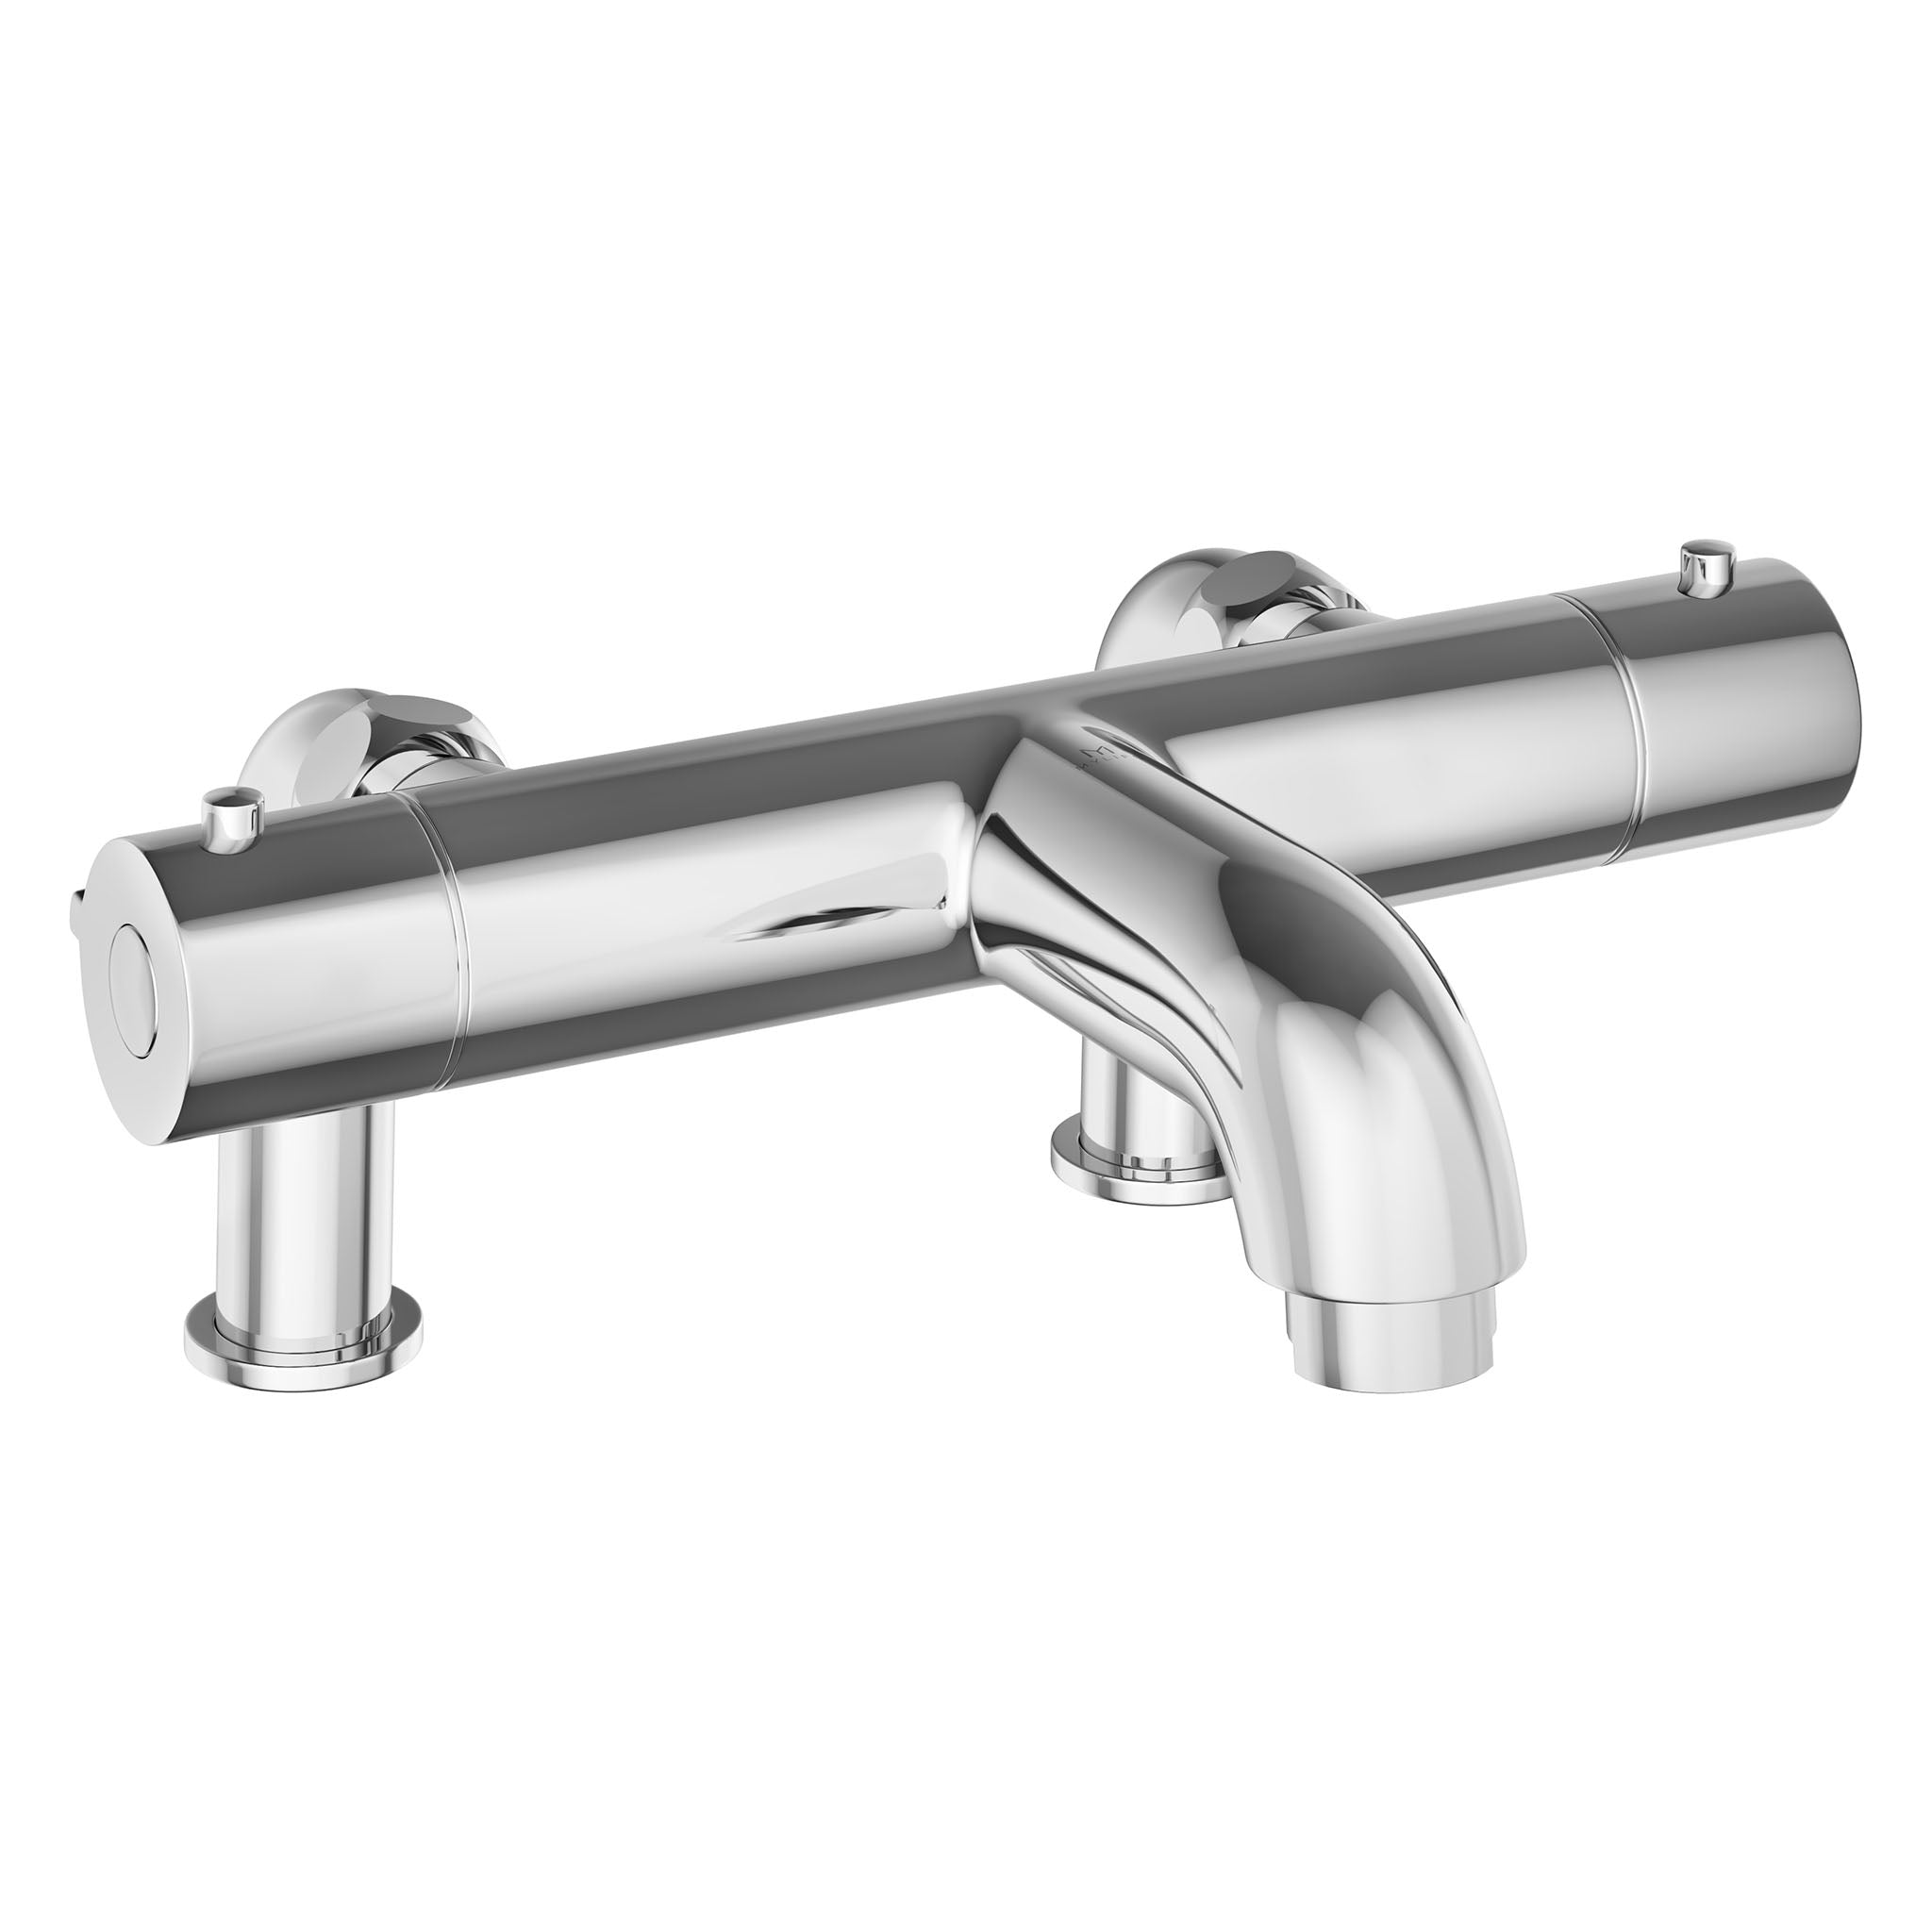 MyStyle Firm Thermostatic Bath Shower Mixer Tap & Legs (No Kit)